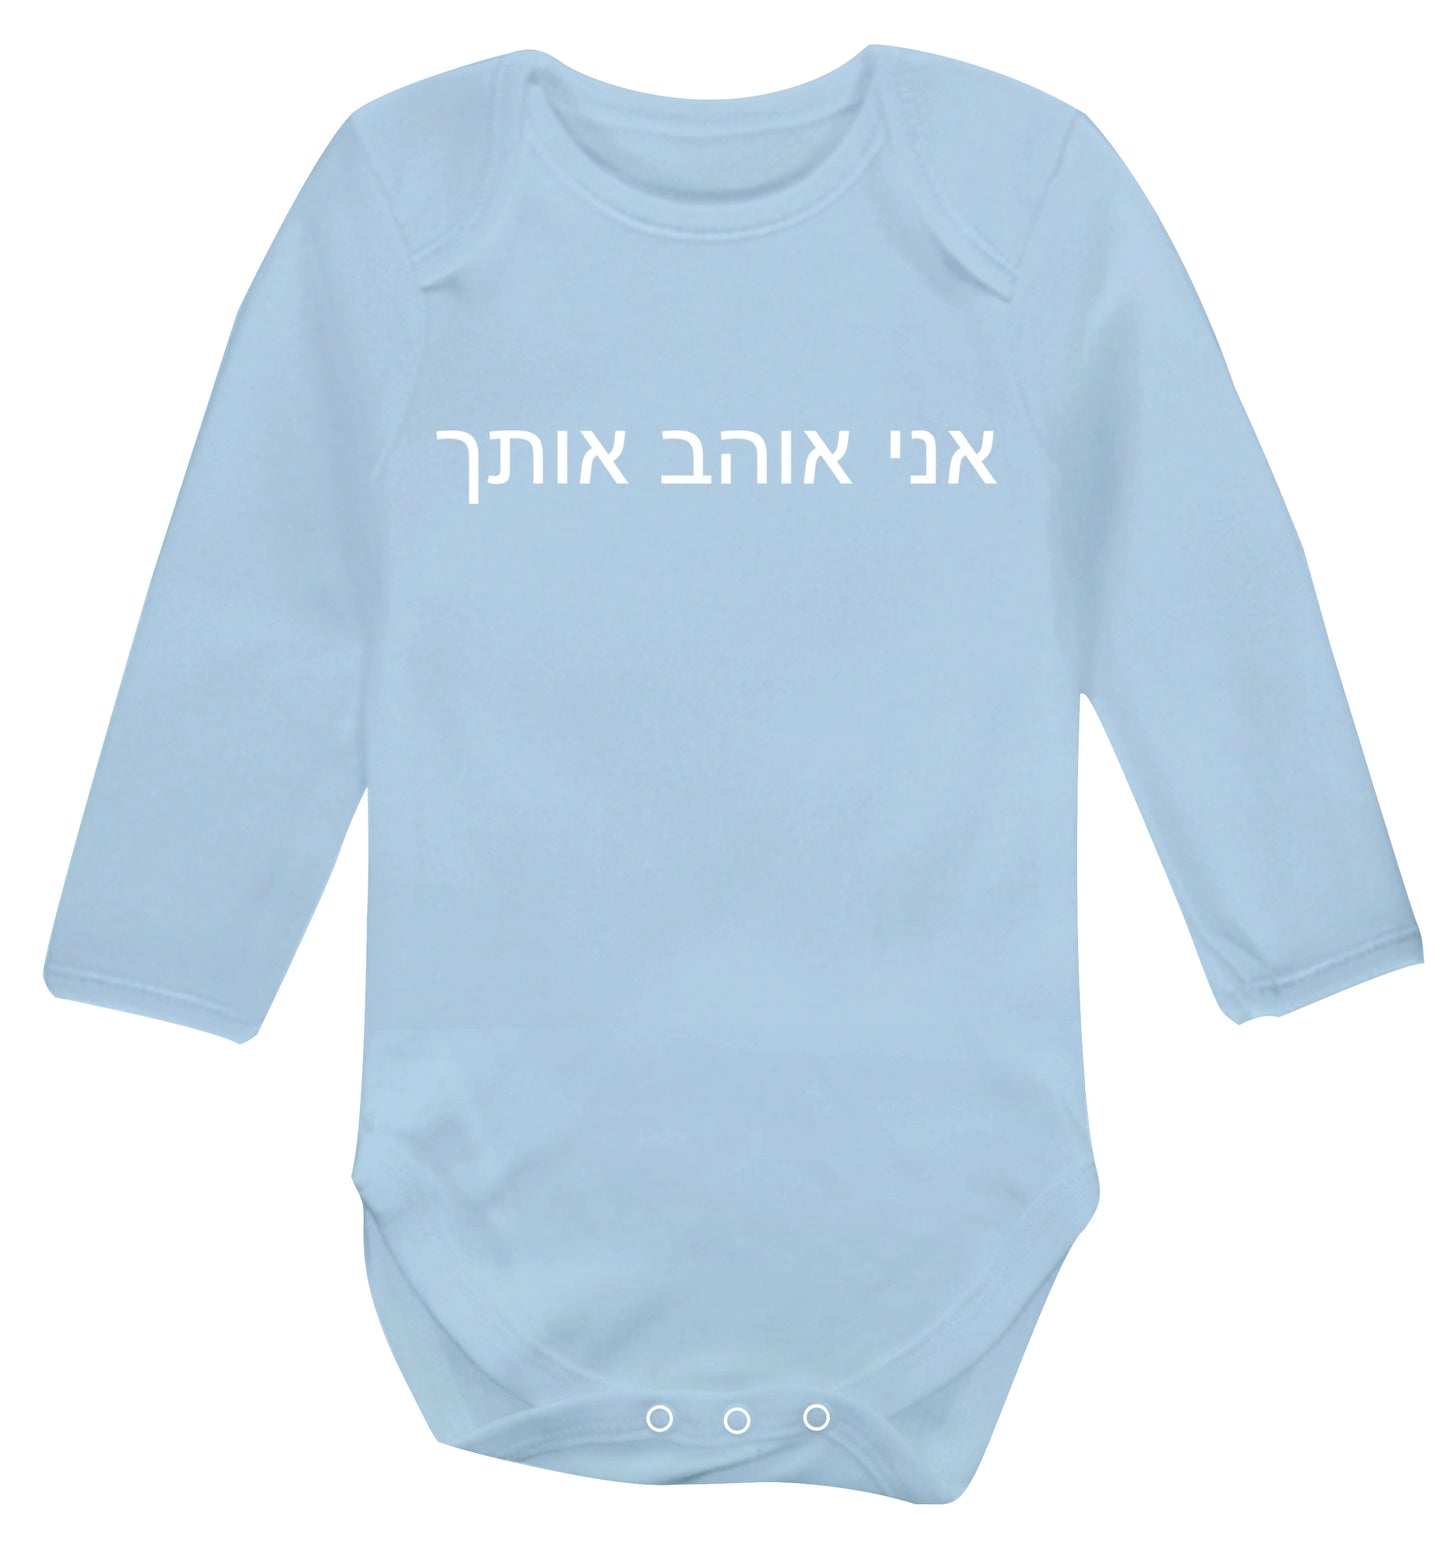 ___ ____ ____ - I love you Baby Vest long sleeved pale blue 6-12 months